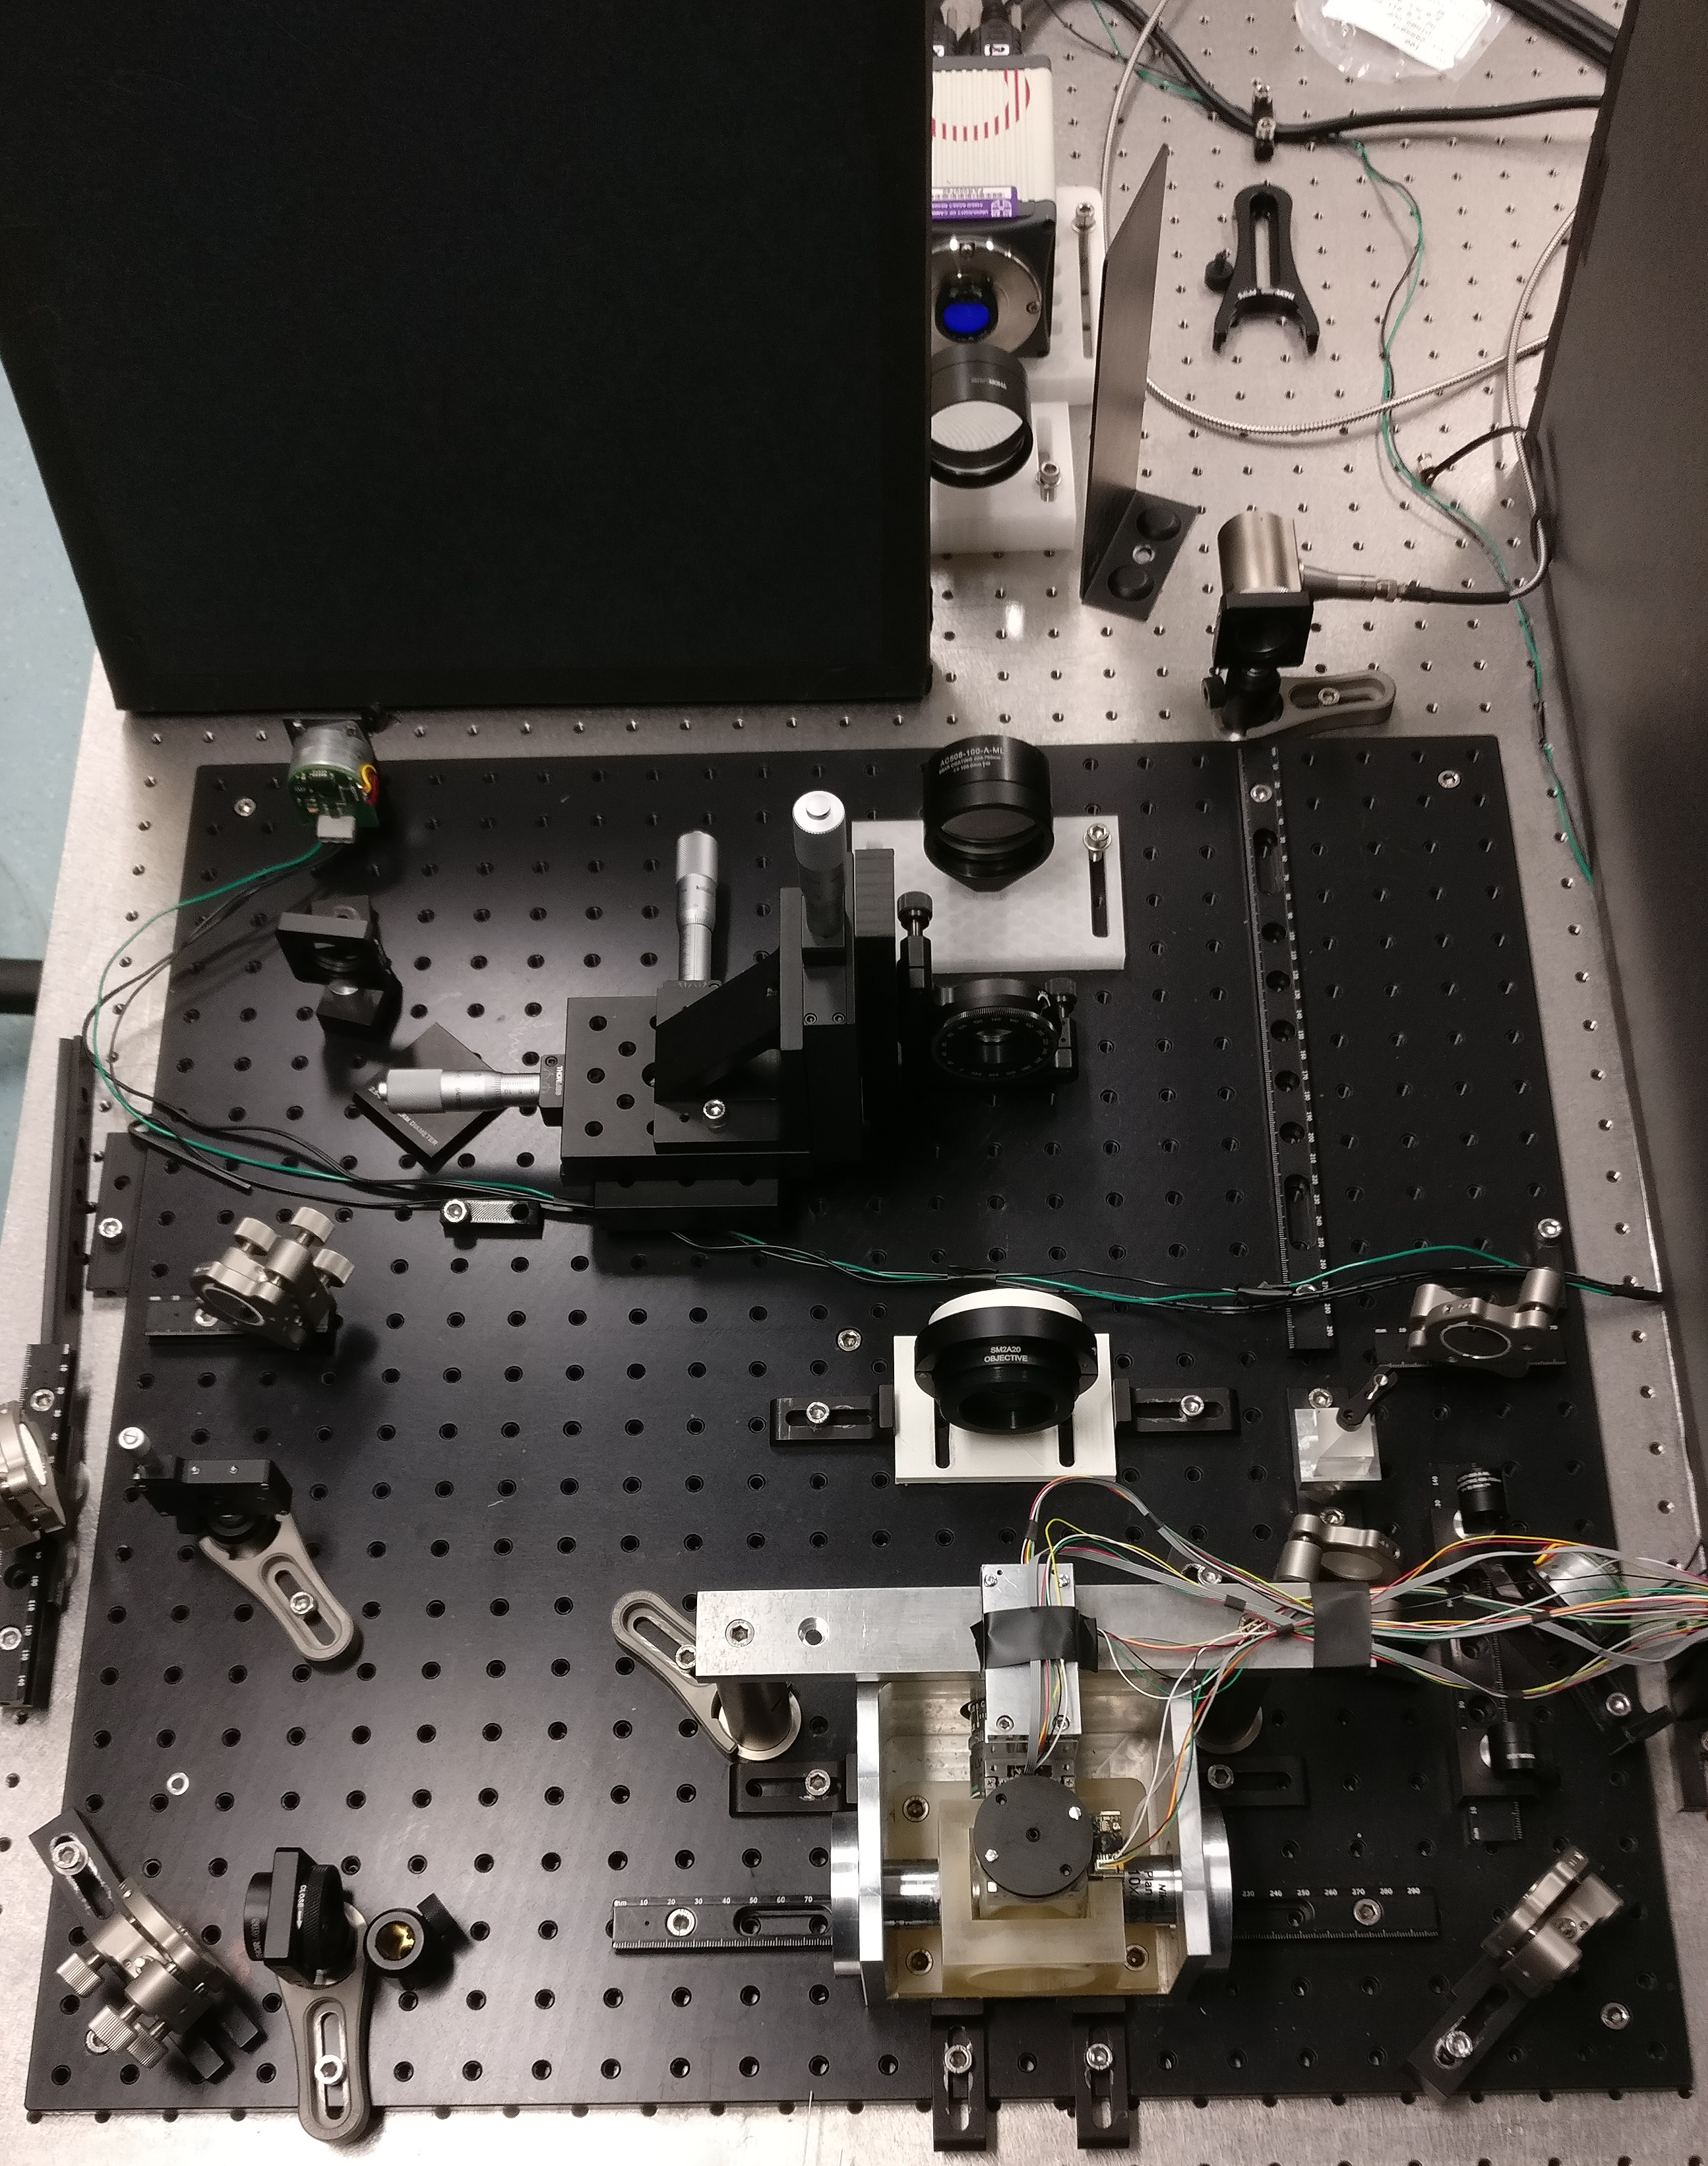 Layout overview of the multiview lightsheet microscope